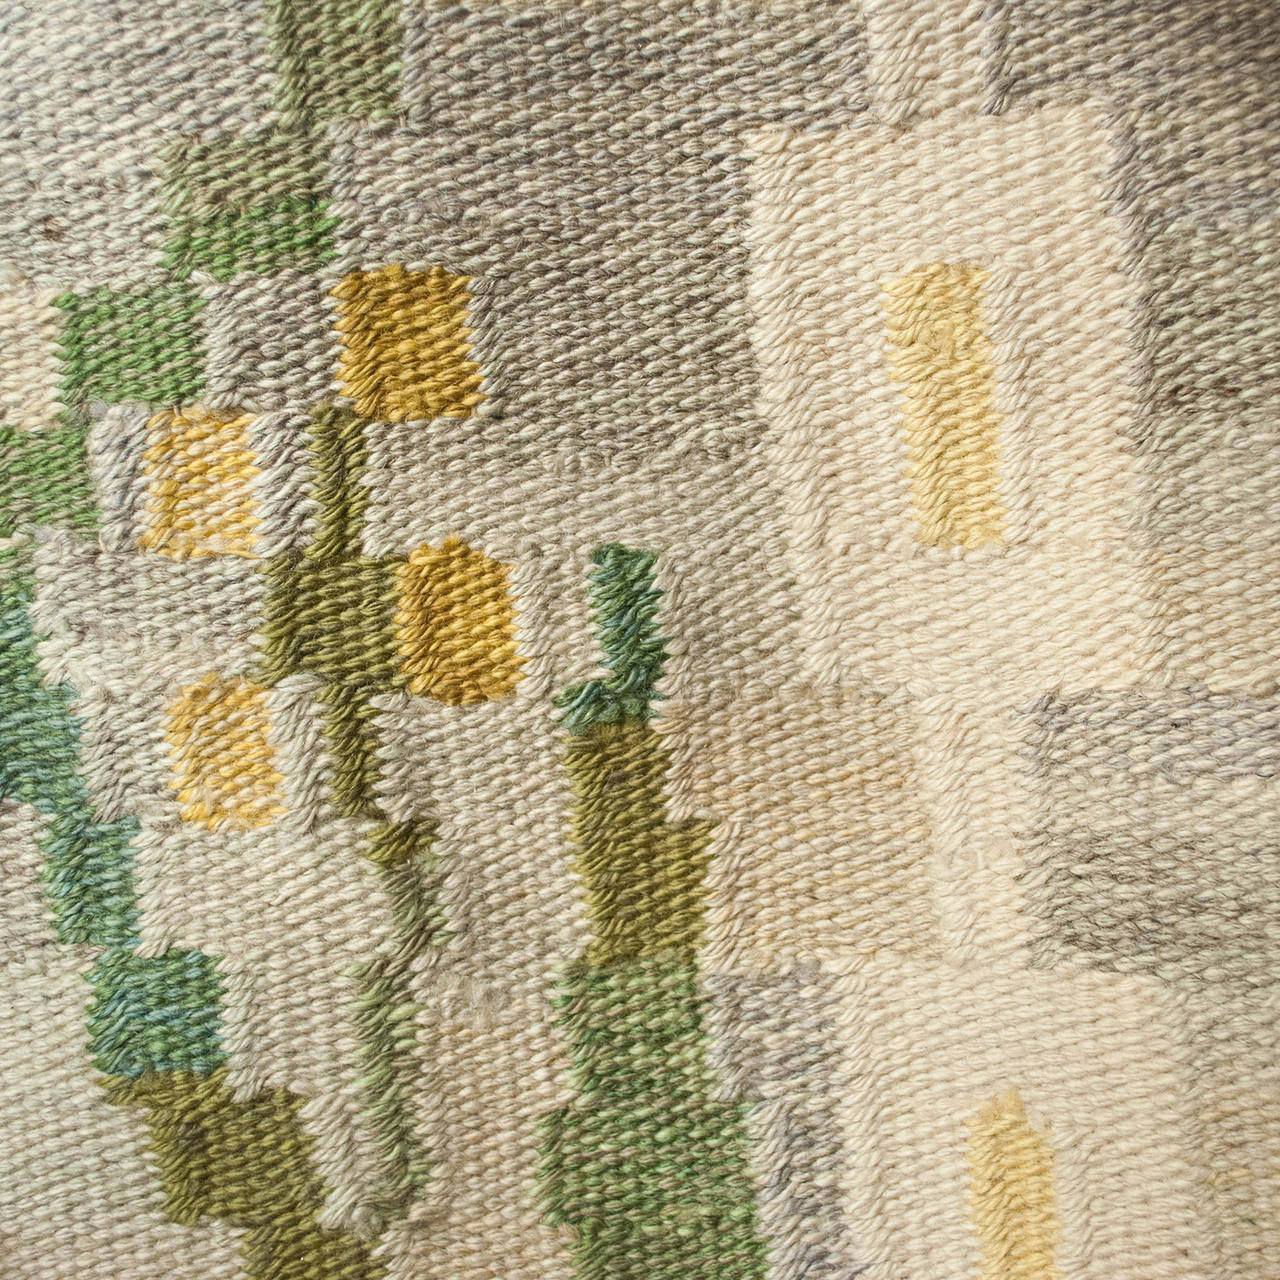 Woven Swedish mid-century wool flat weave rug with yellow flowers on heathered ground.